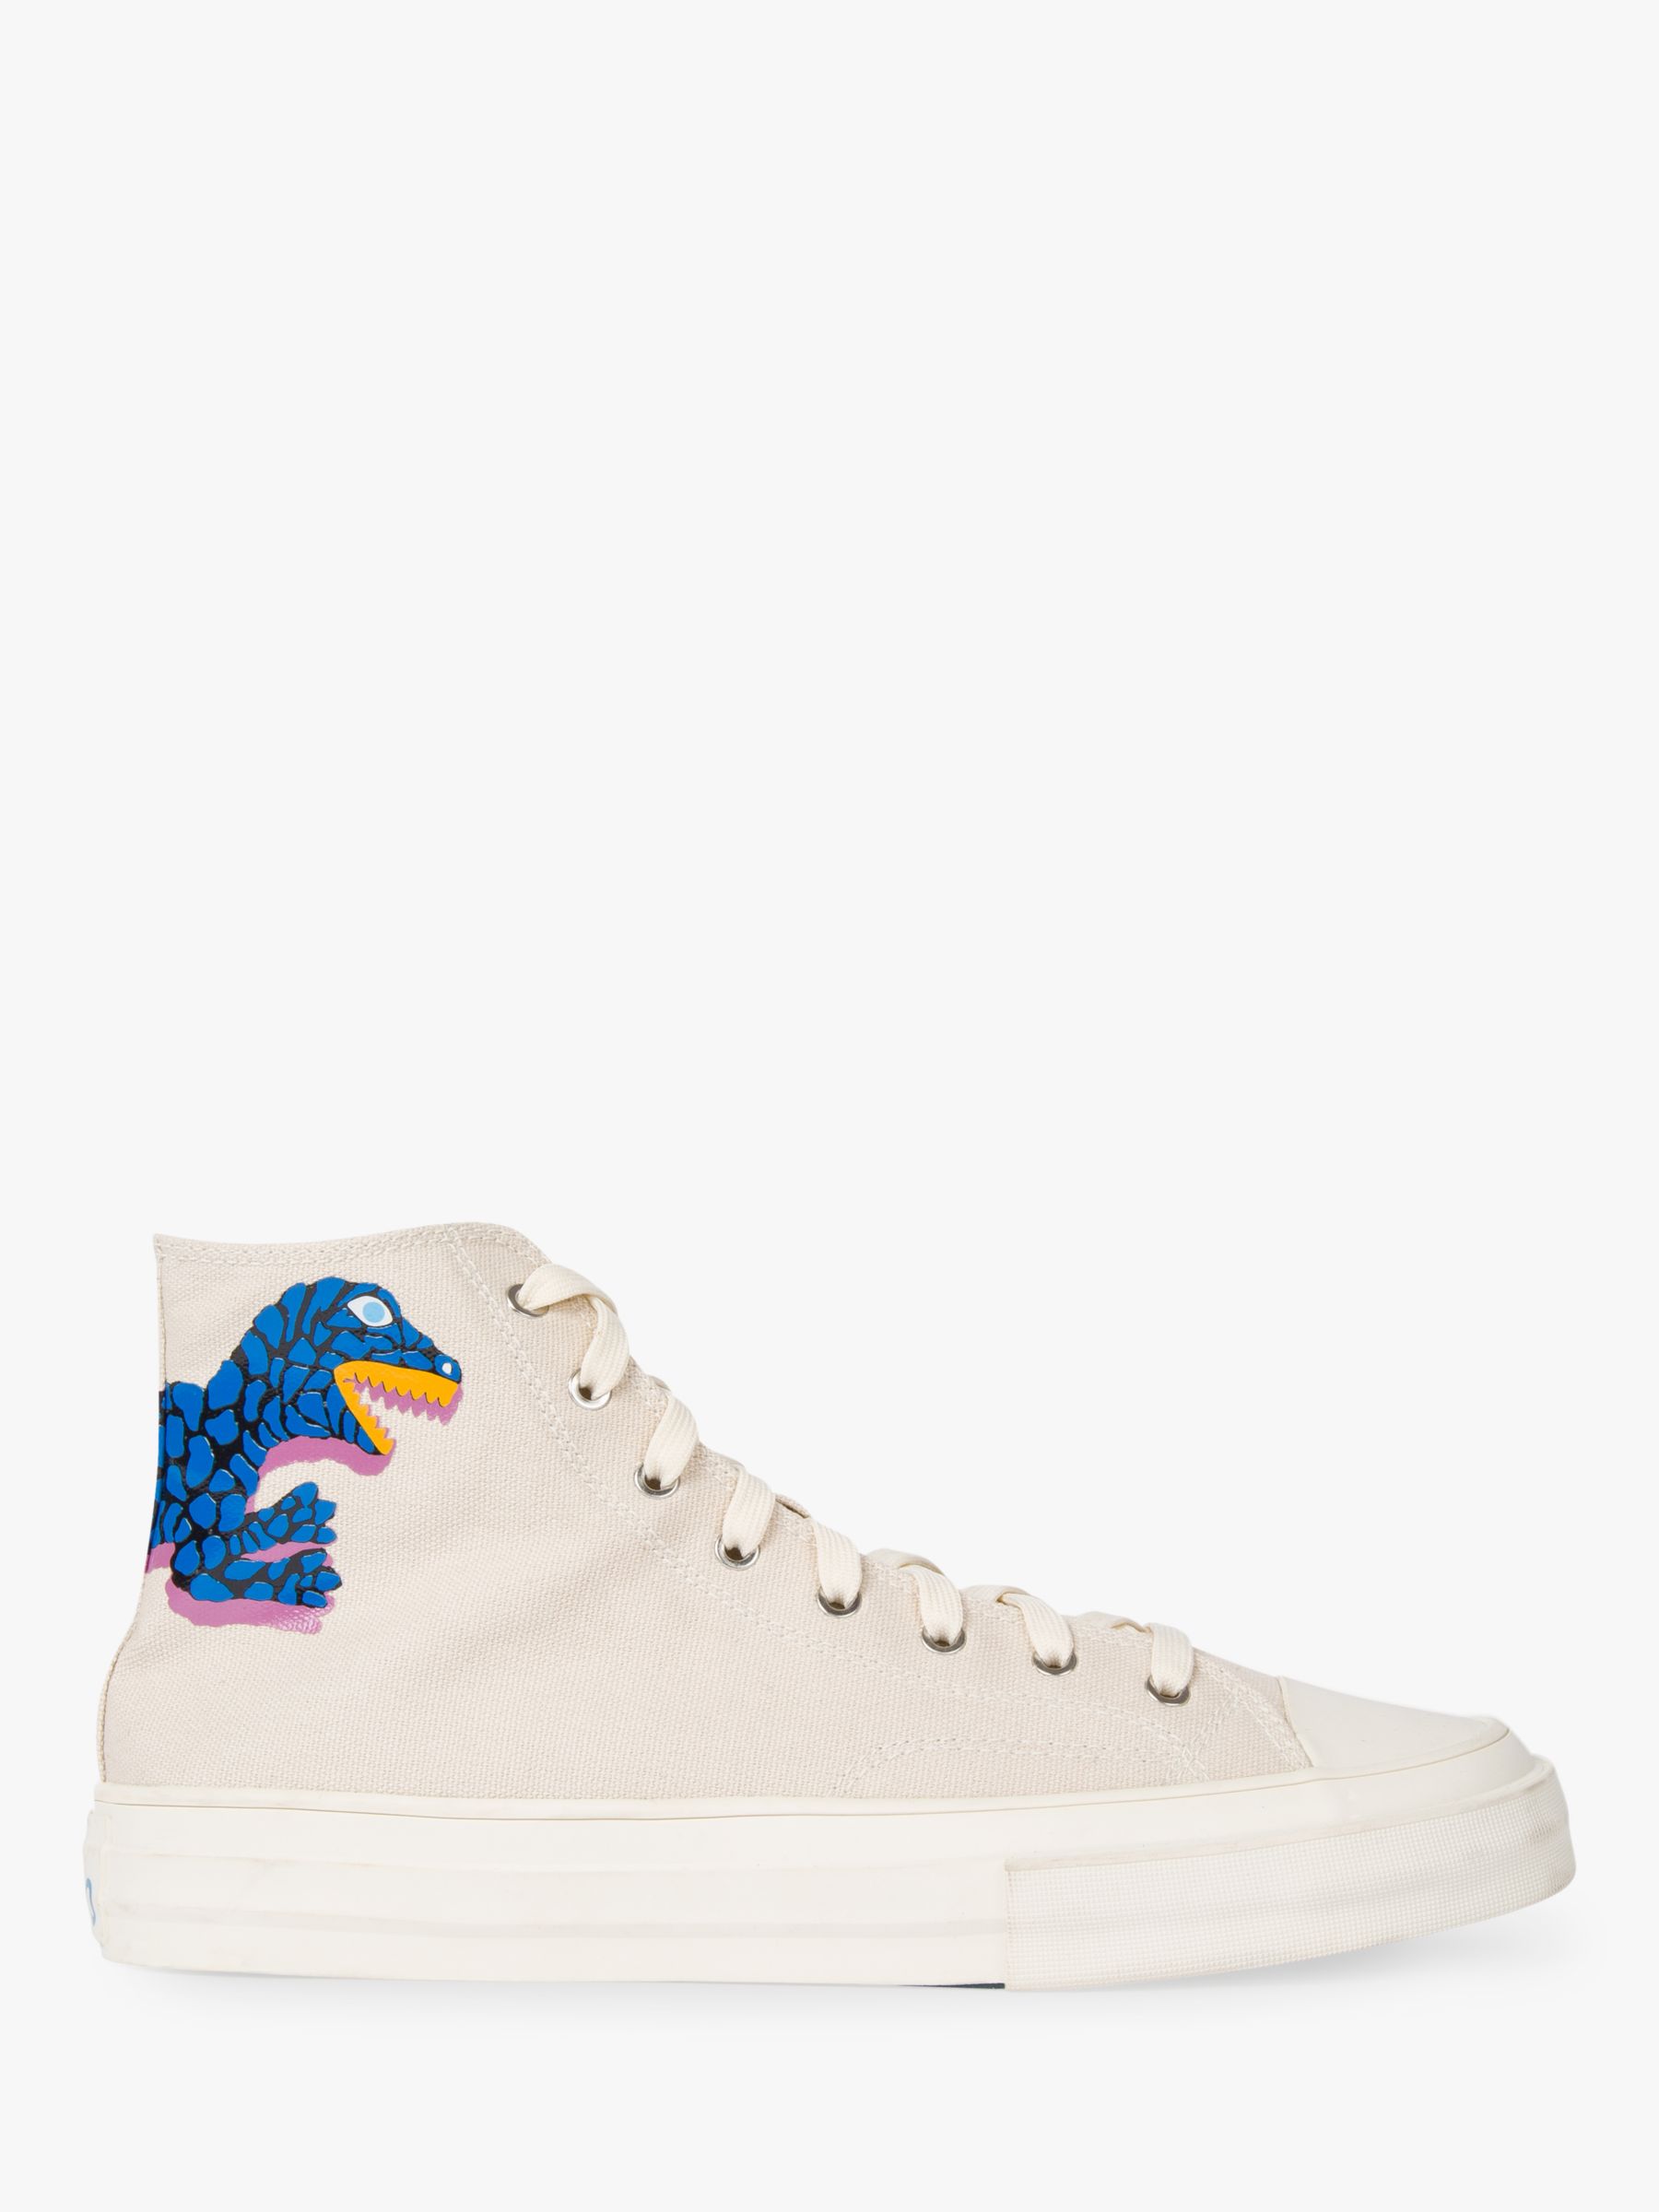 PS Paul Smith Kirk Dinosaur High Top Trainers, Ivory/Blue Dino